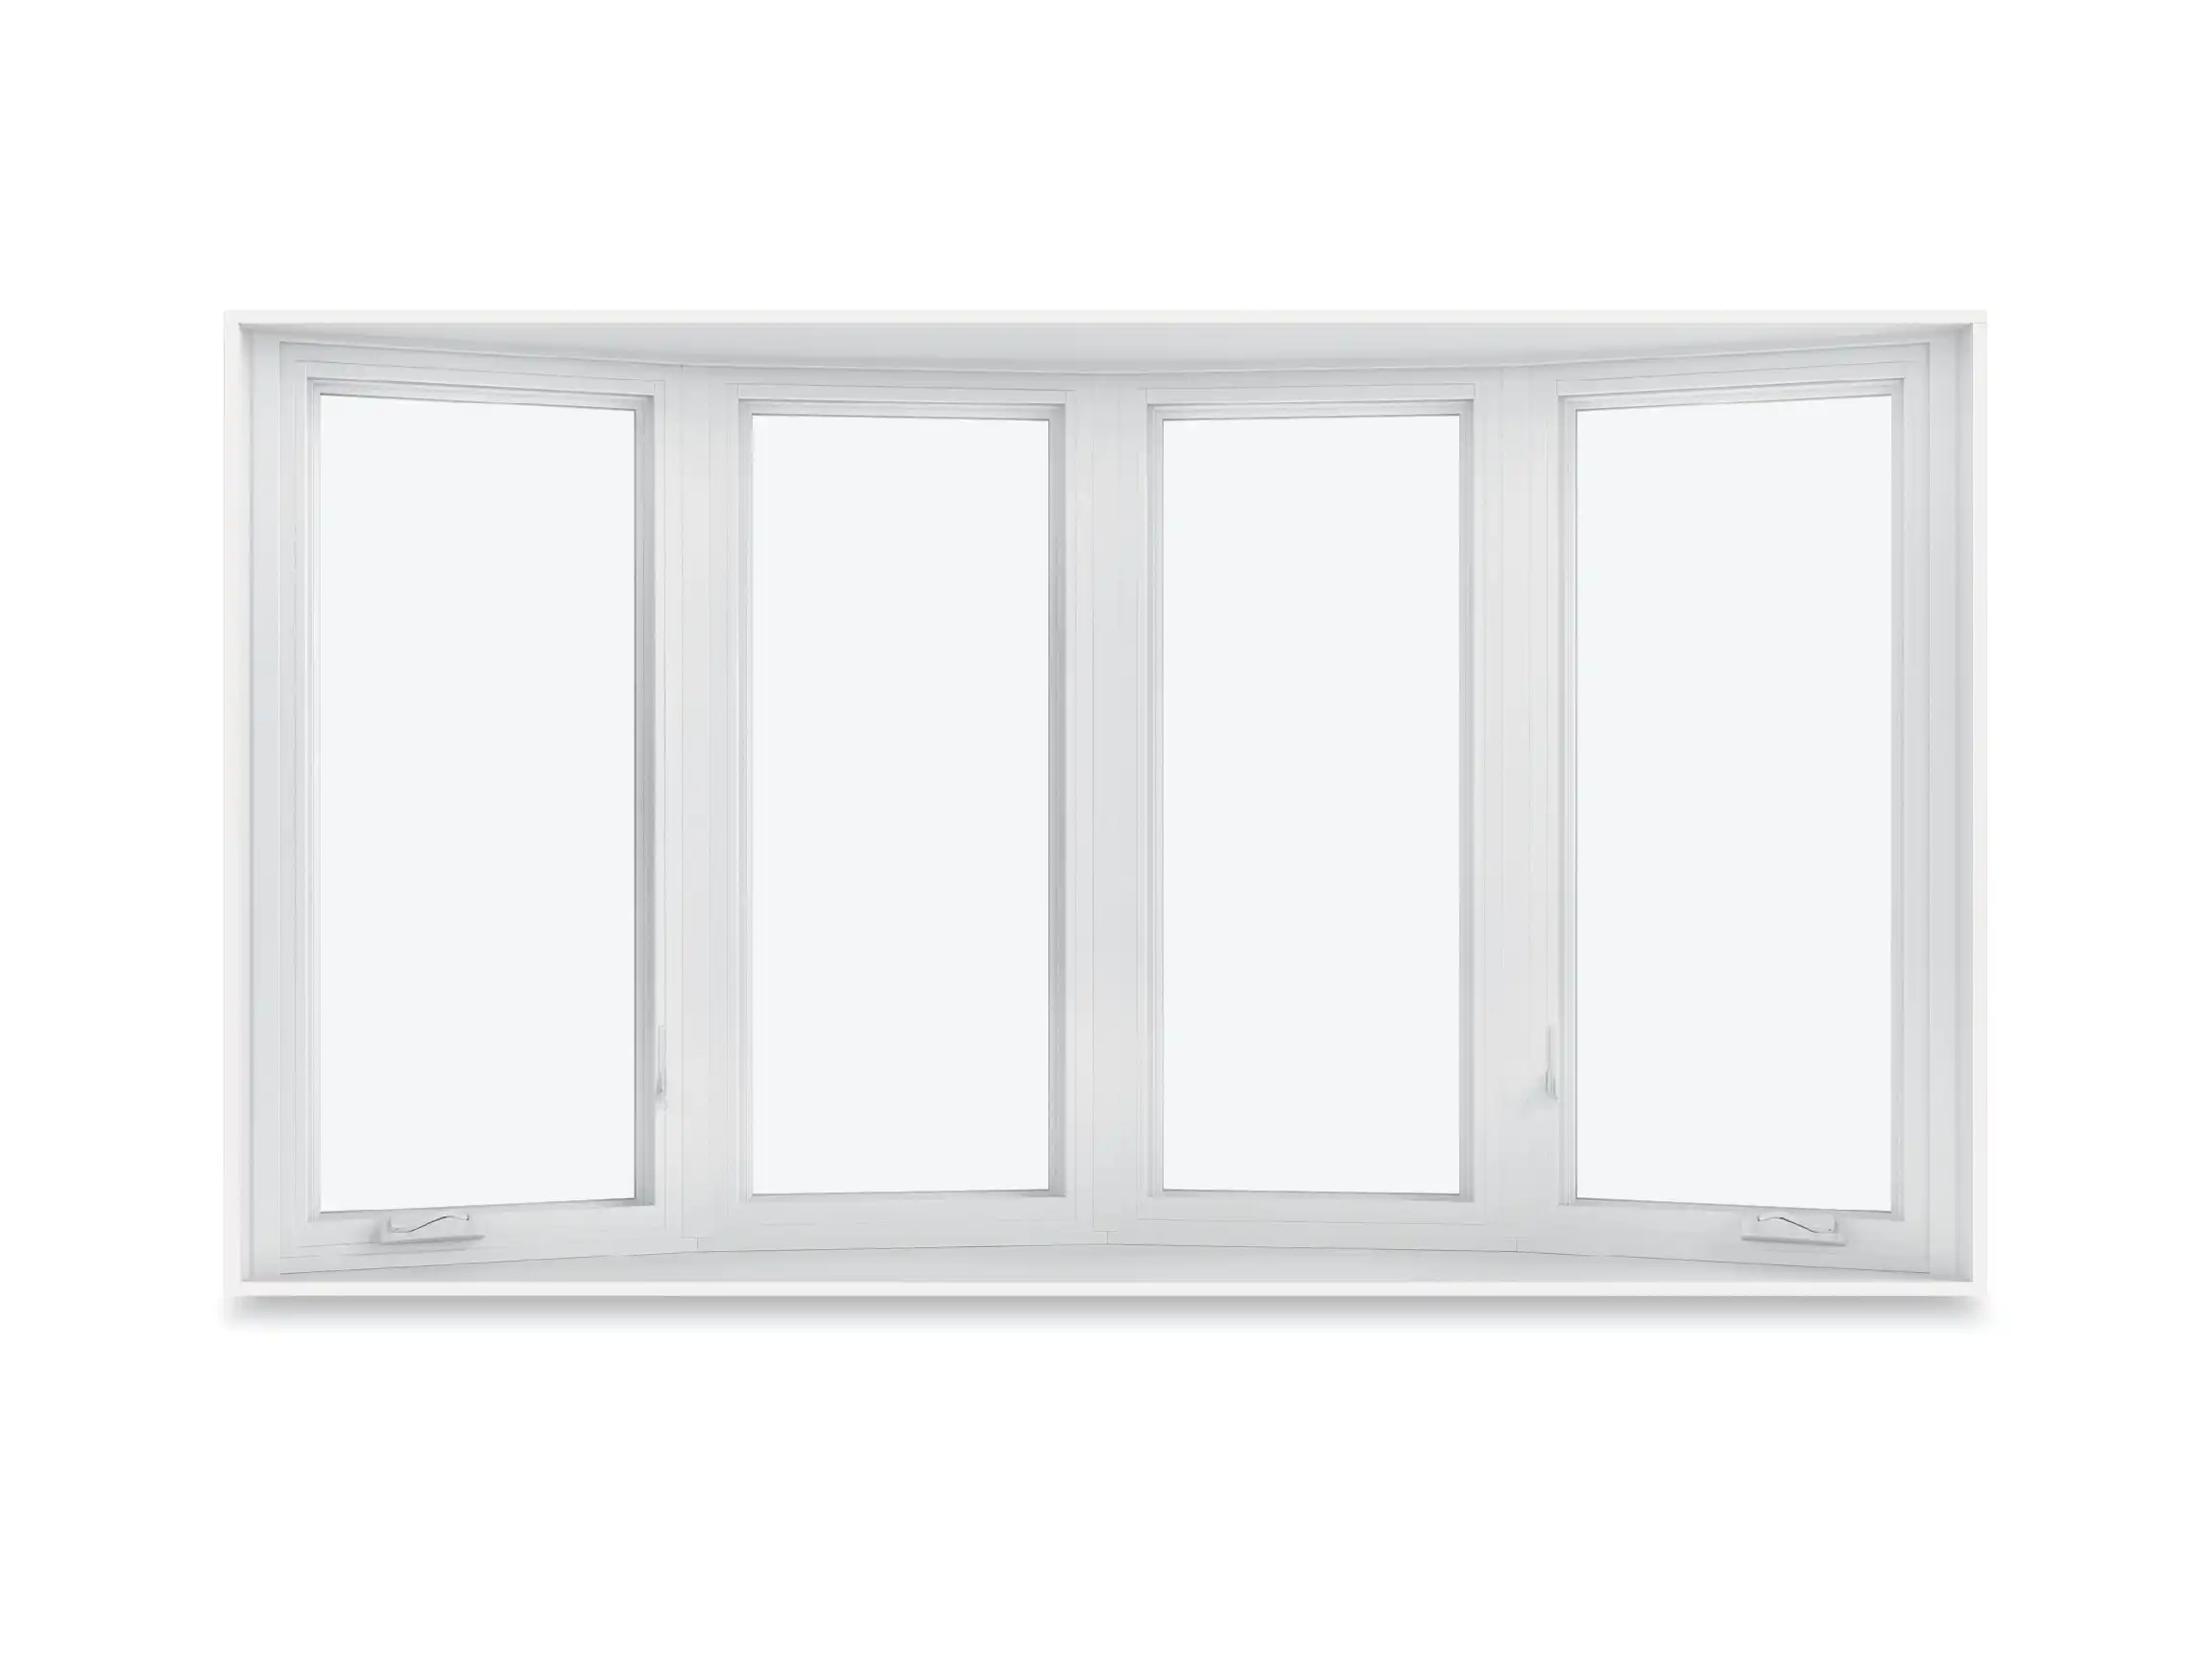 Image of a white four-wide Marvin Replacement Bow window with flanking Casement windows. 